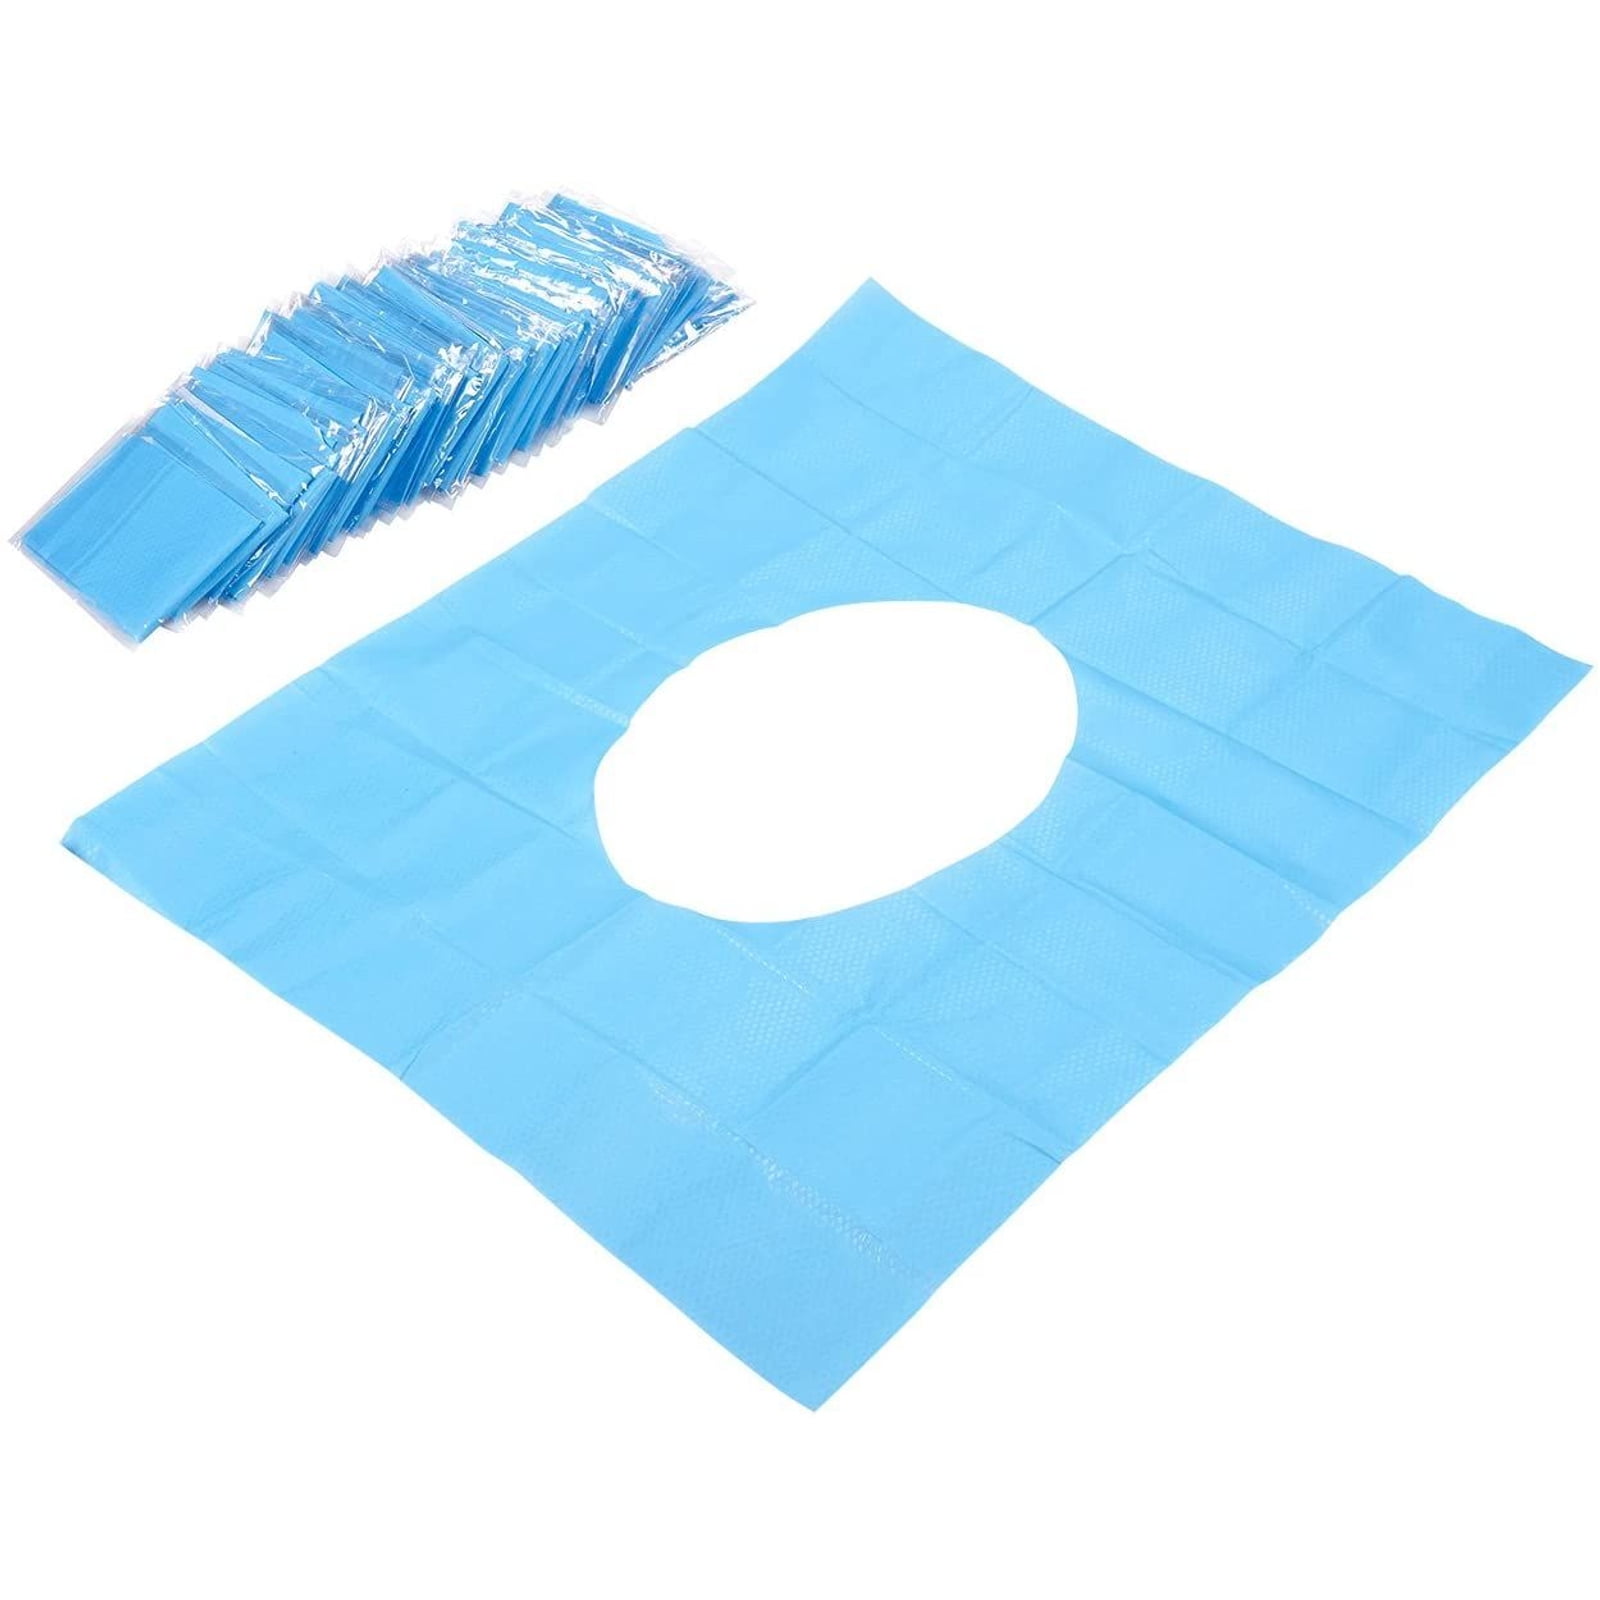 Disposable Toilet Seat Covers Flushable Paper Travel Pack 50-Count 